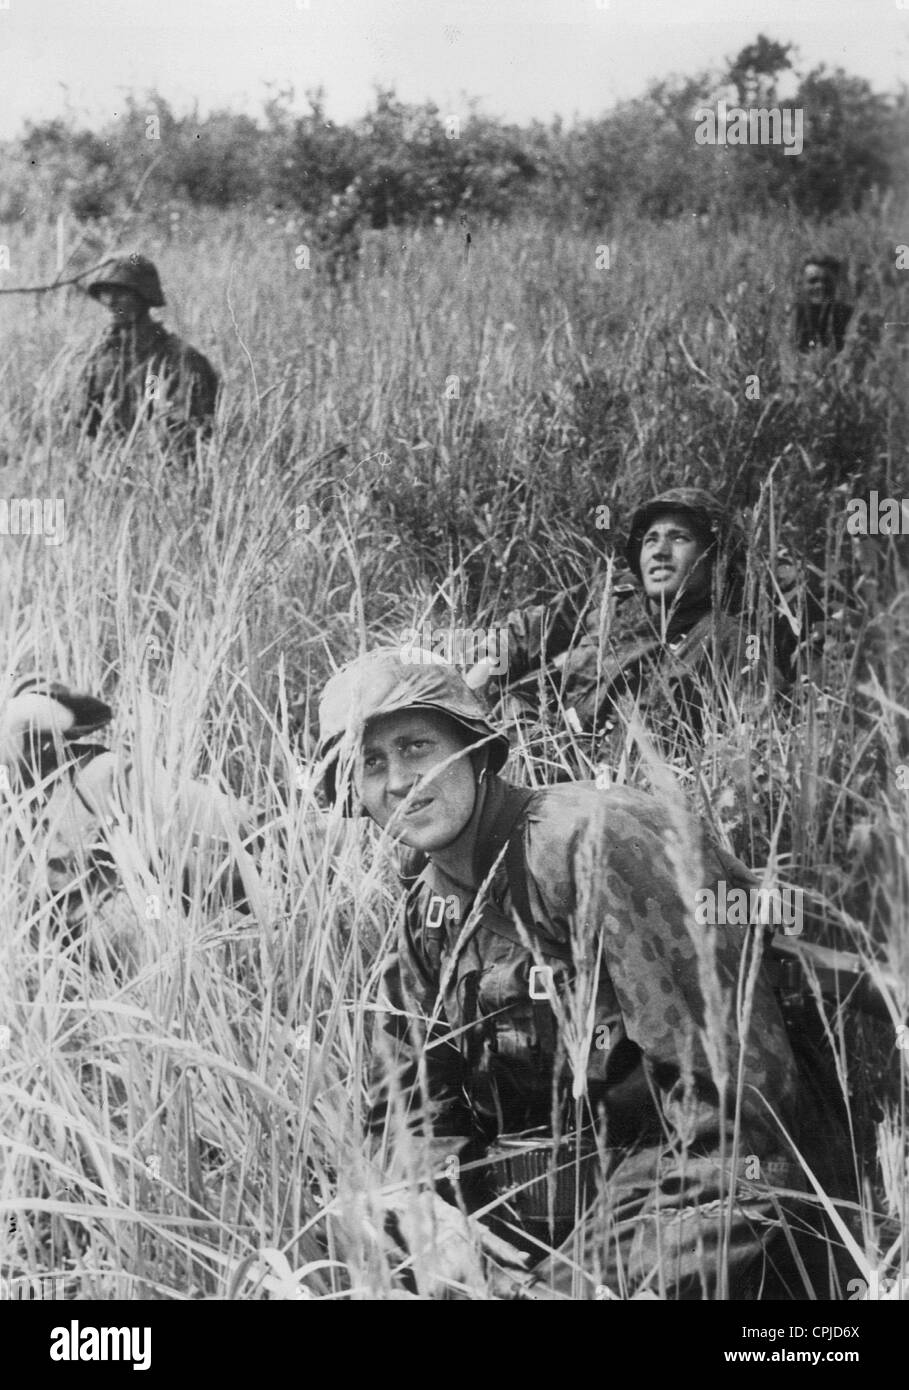 Soldiers of the Waffen-SS in Russia, 1941 Stock Photo